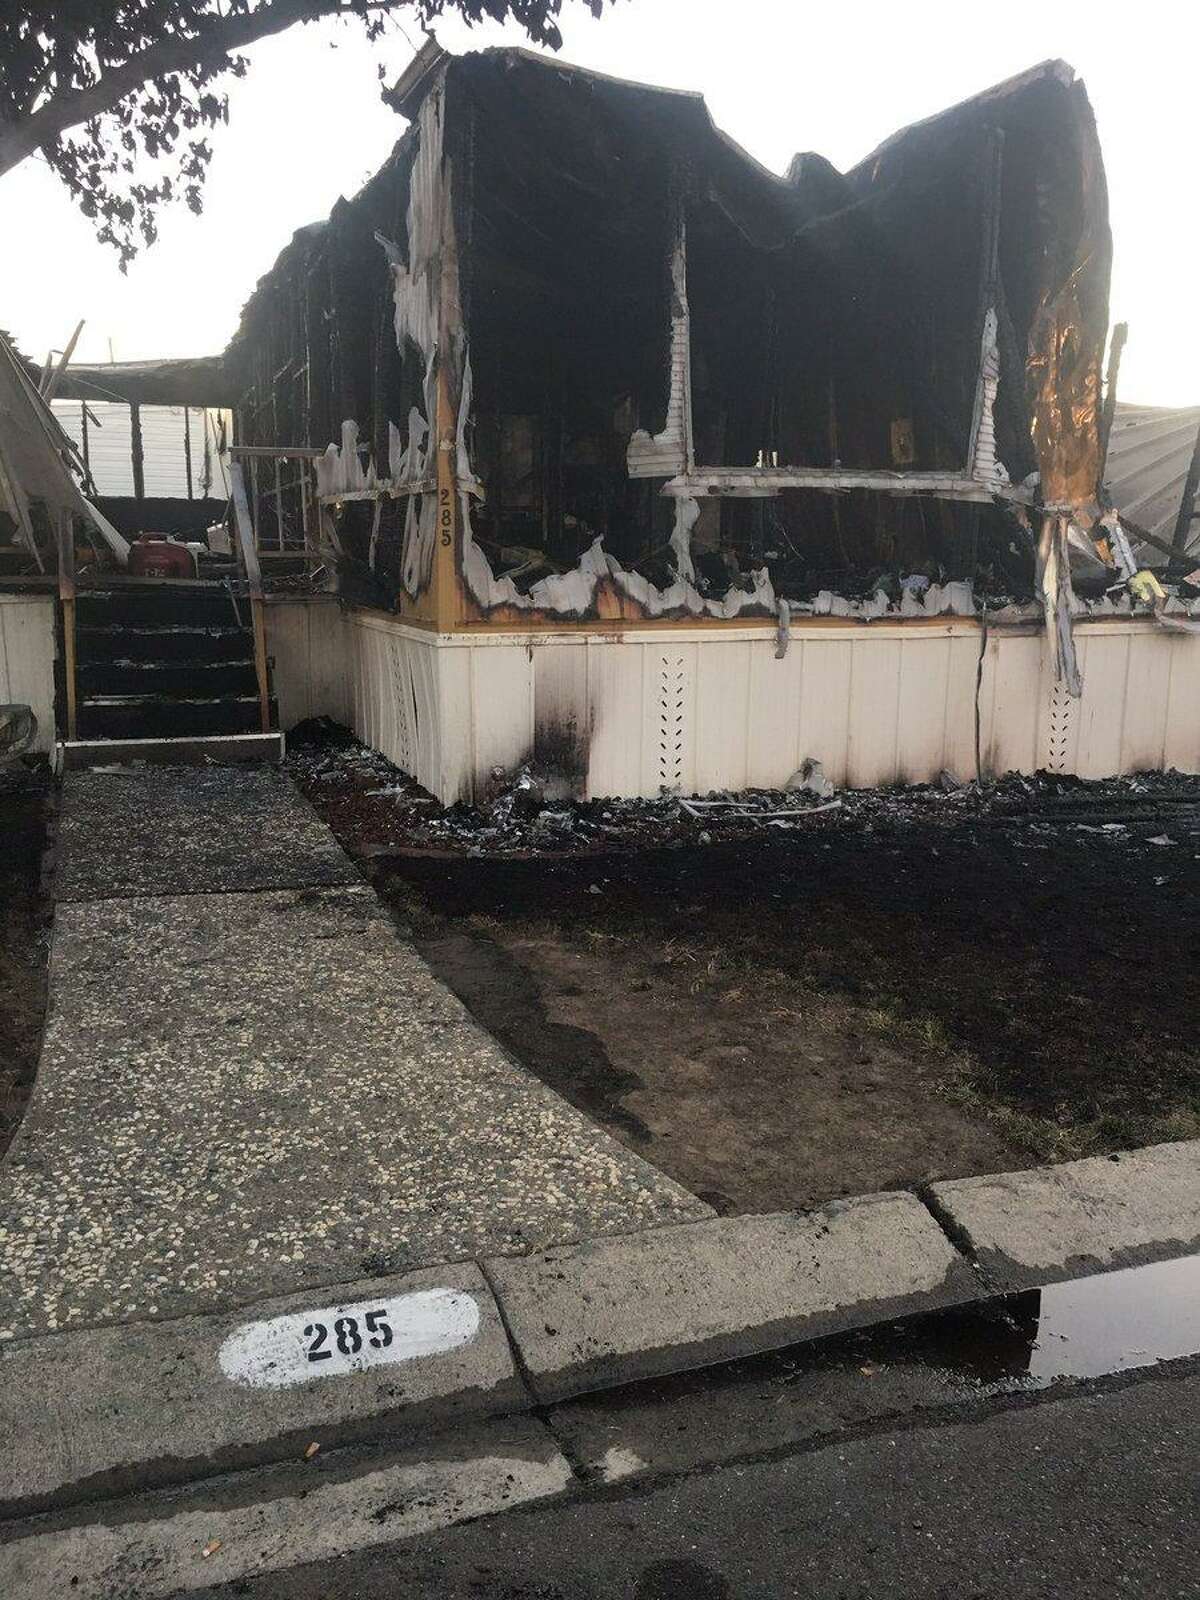 A mobile home fire killed two people in San Leandro Thursday morning, fire officials said.